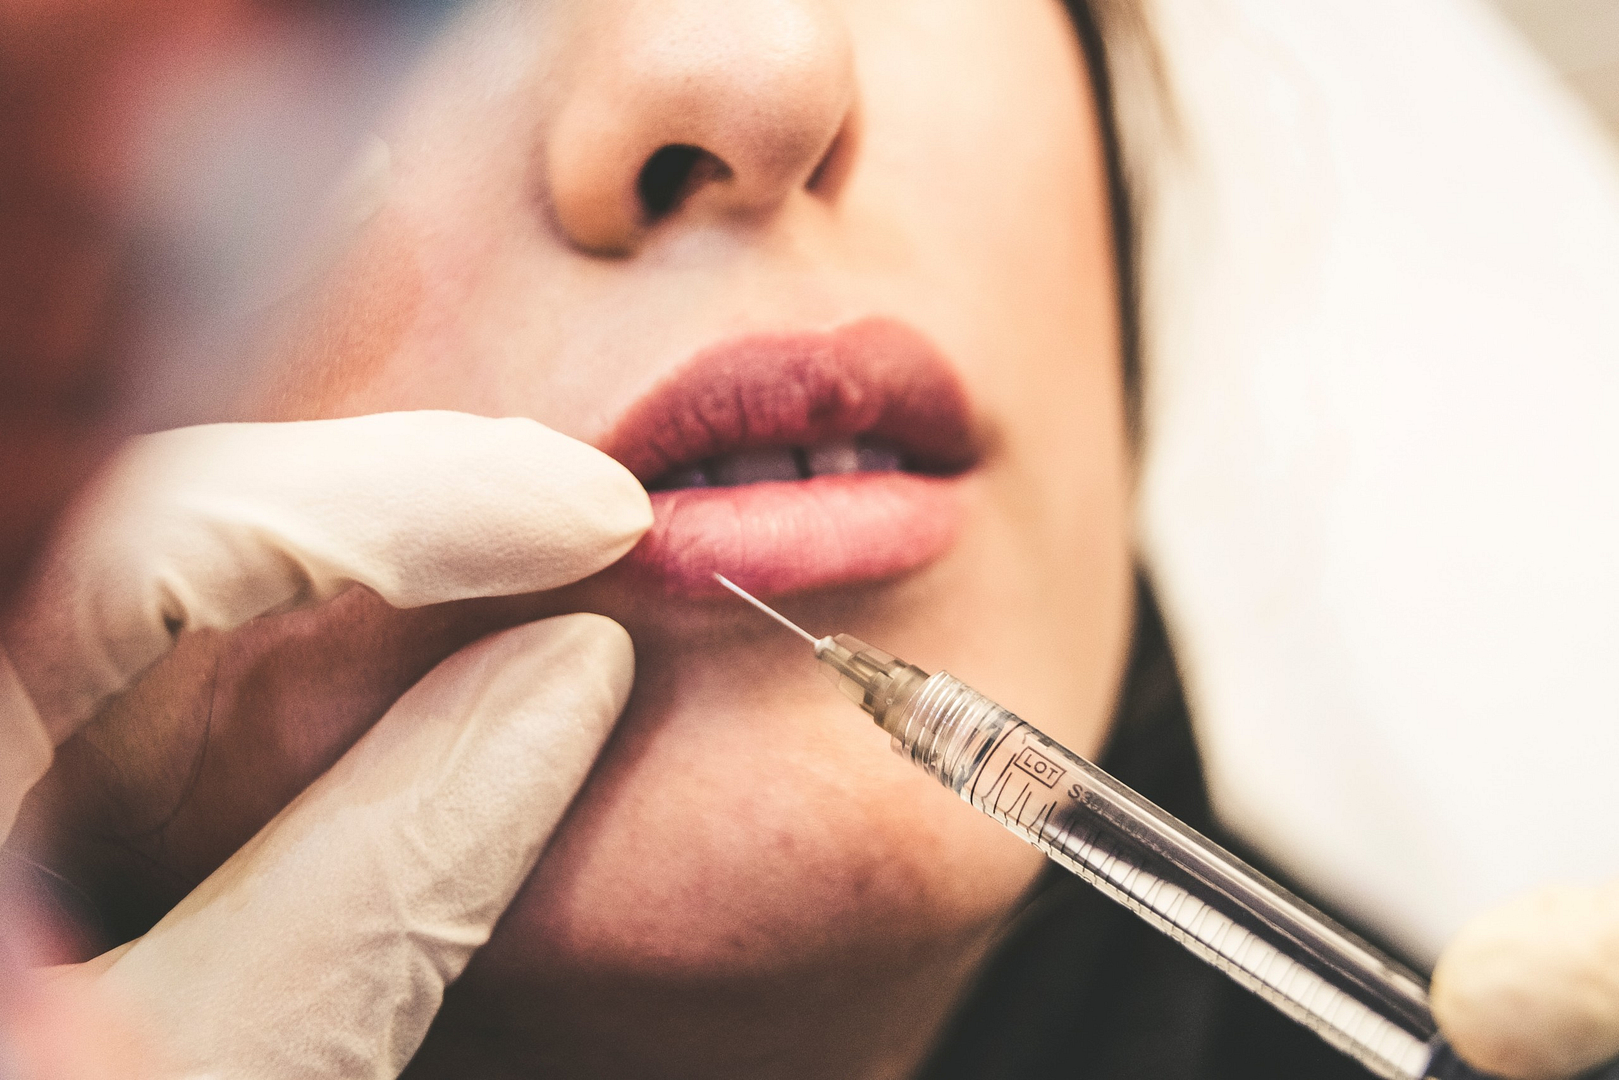 can botox be reversed?